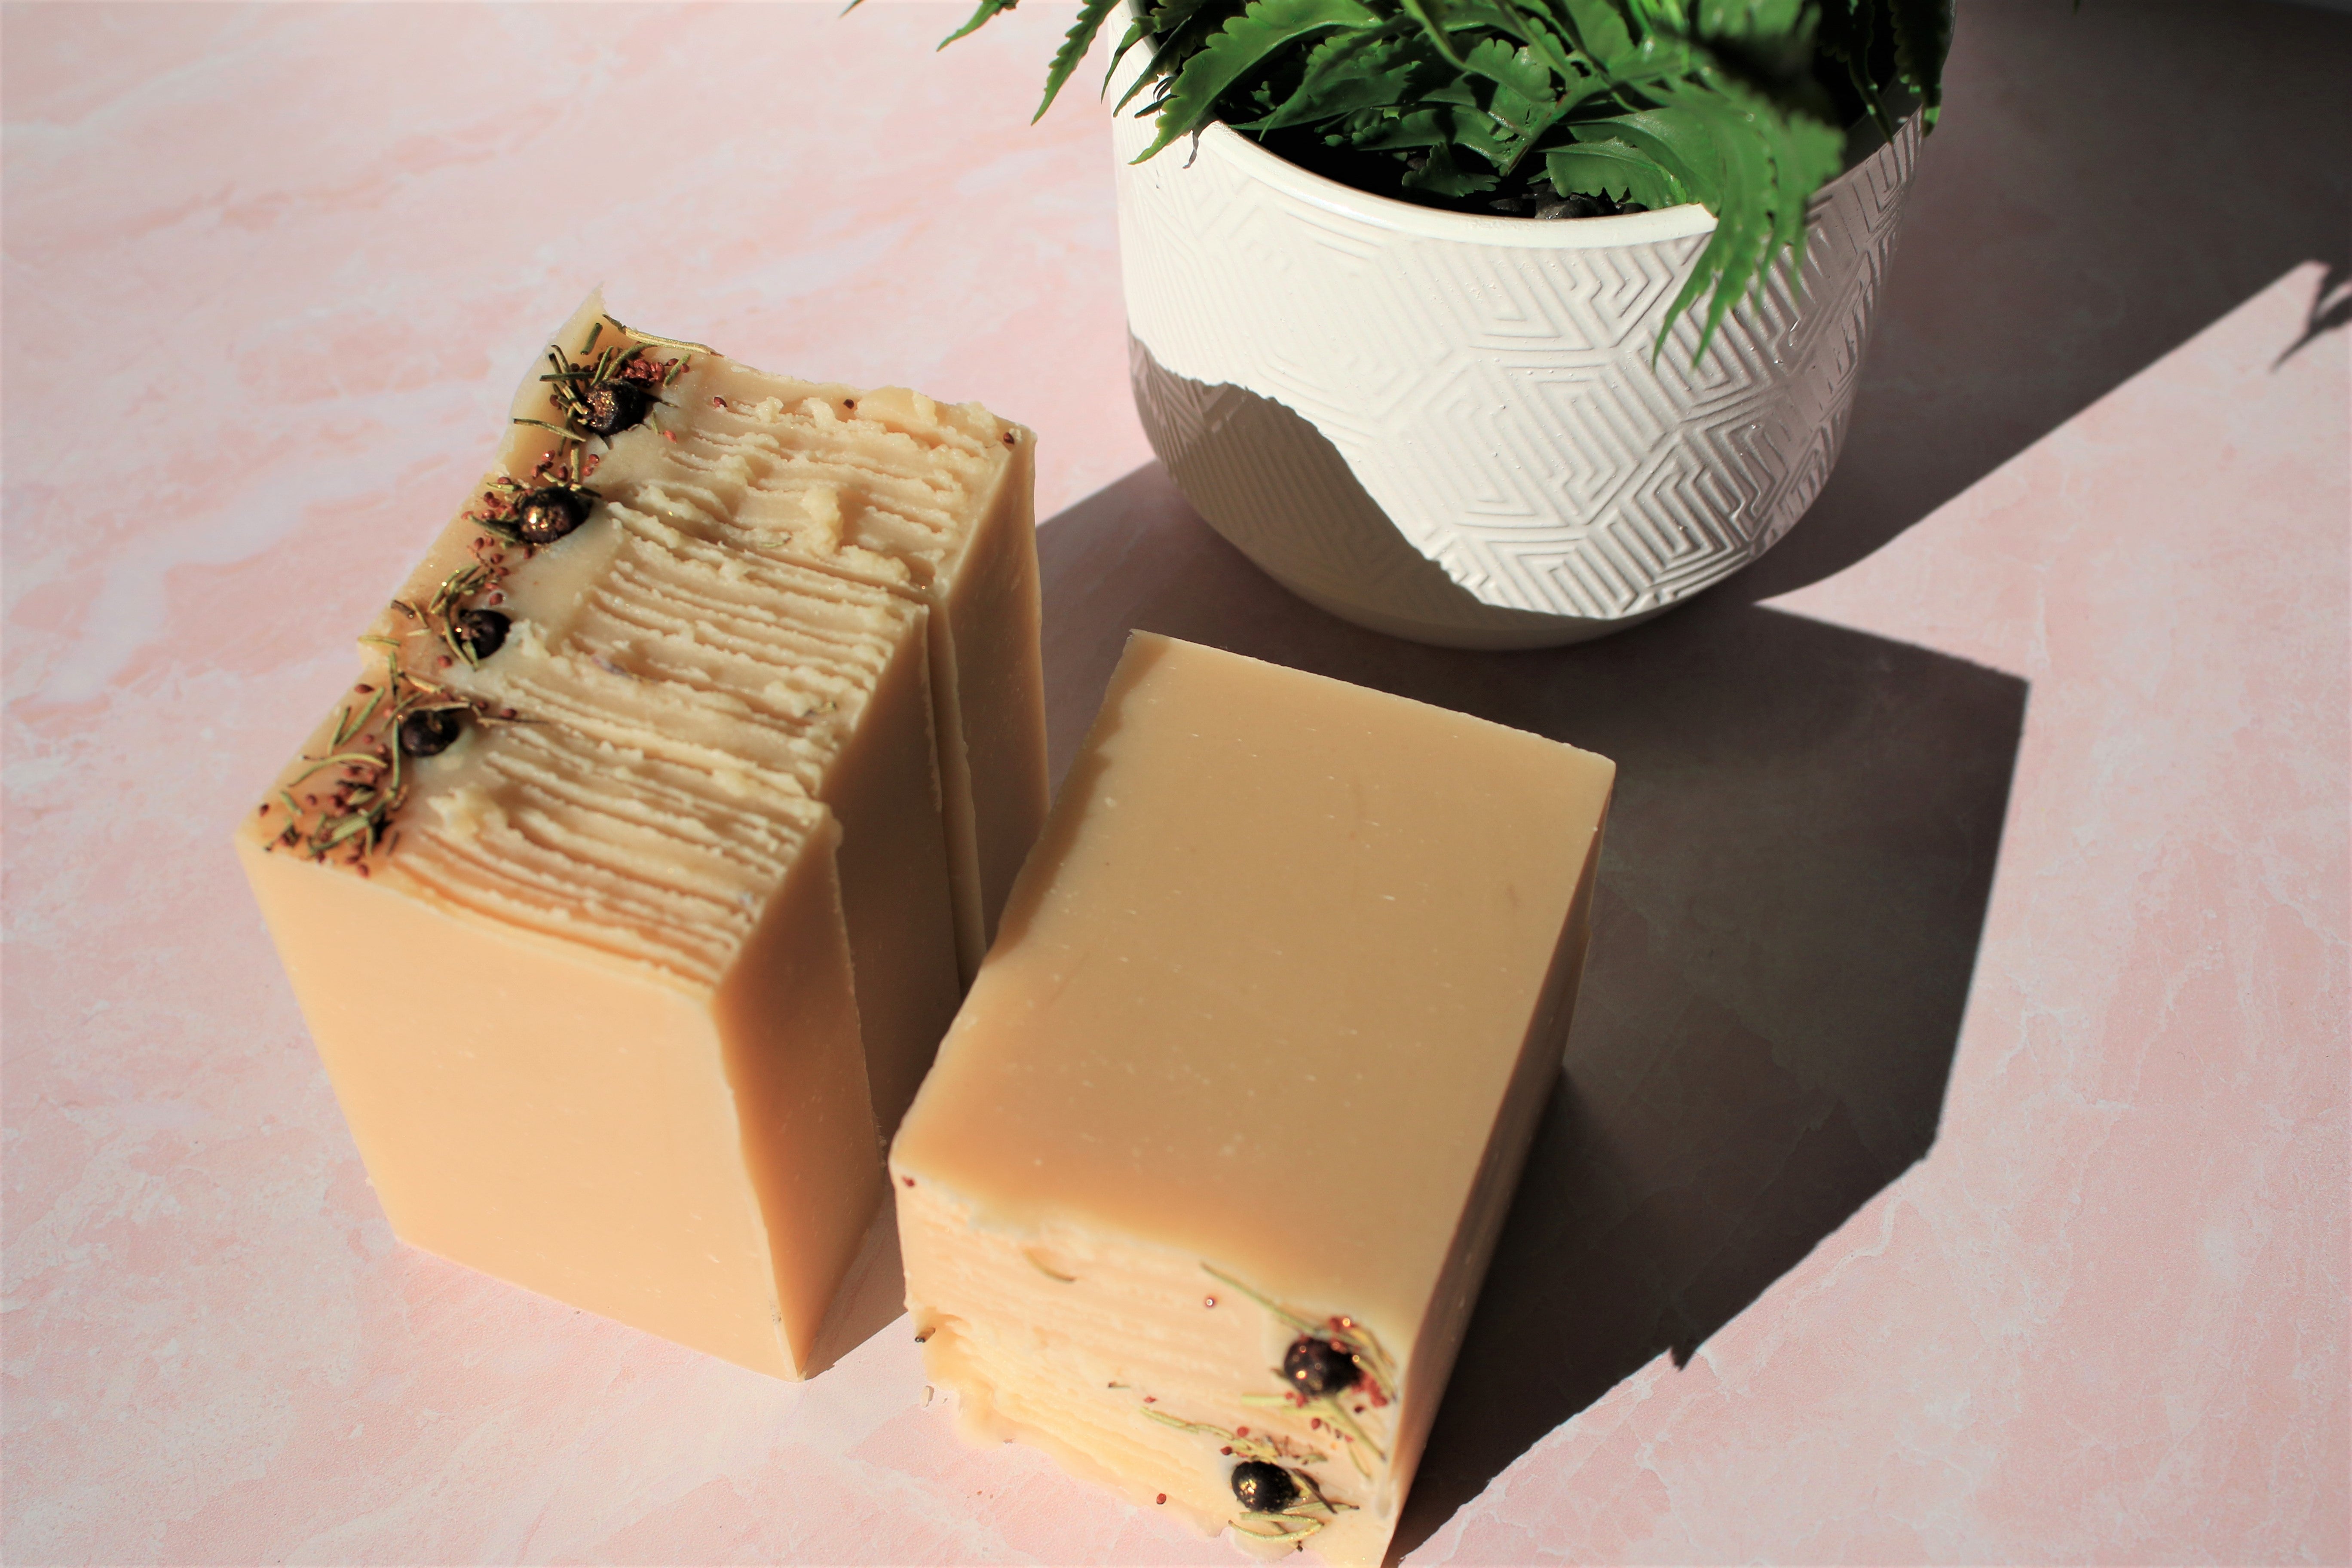 Triple Butter Luxury Soap made by hibisKHus -by June